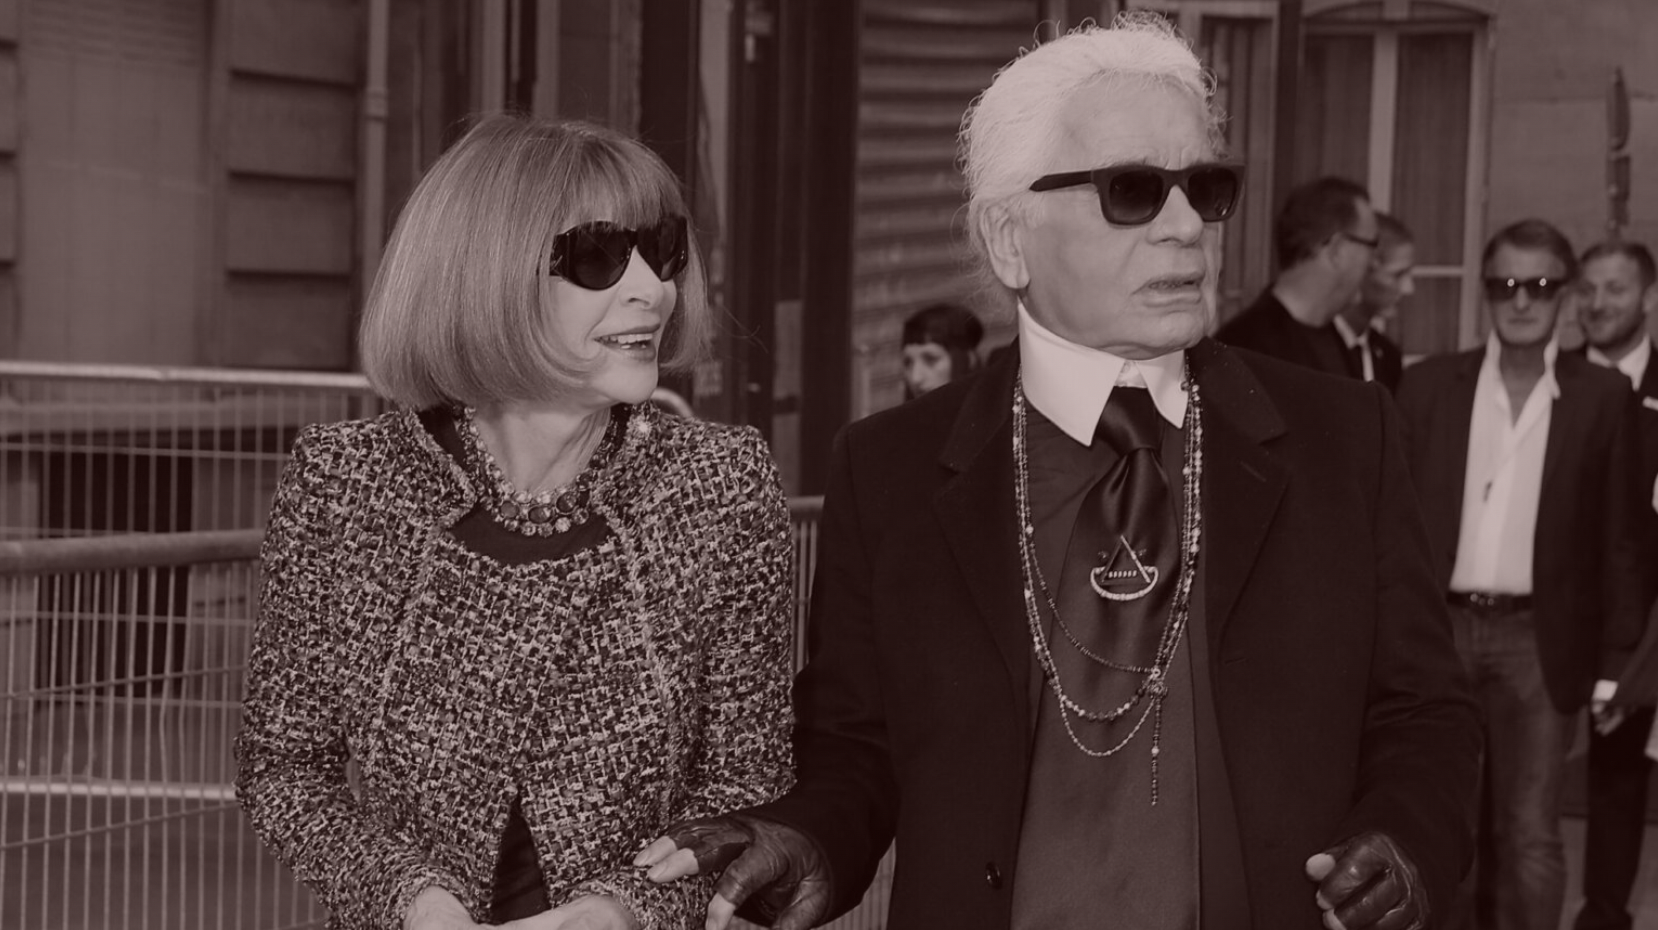 Lagerfeld & The Met Ball-ification of Fashion